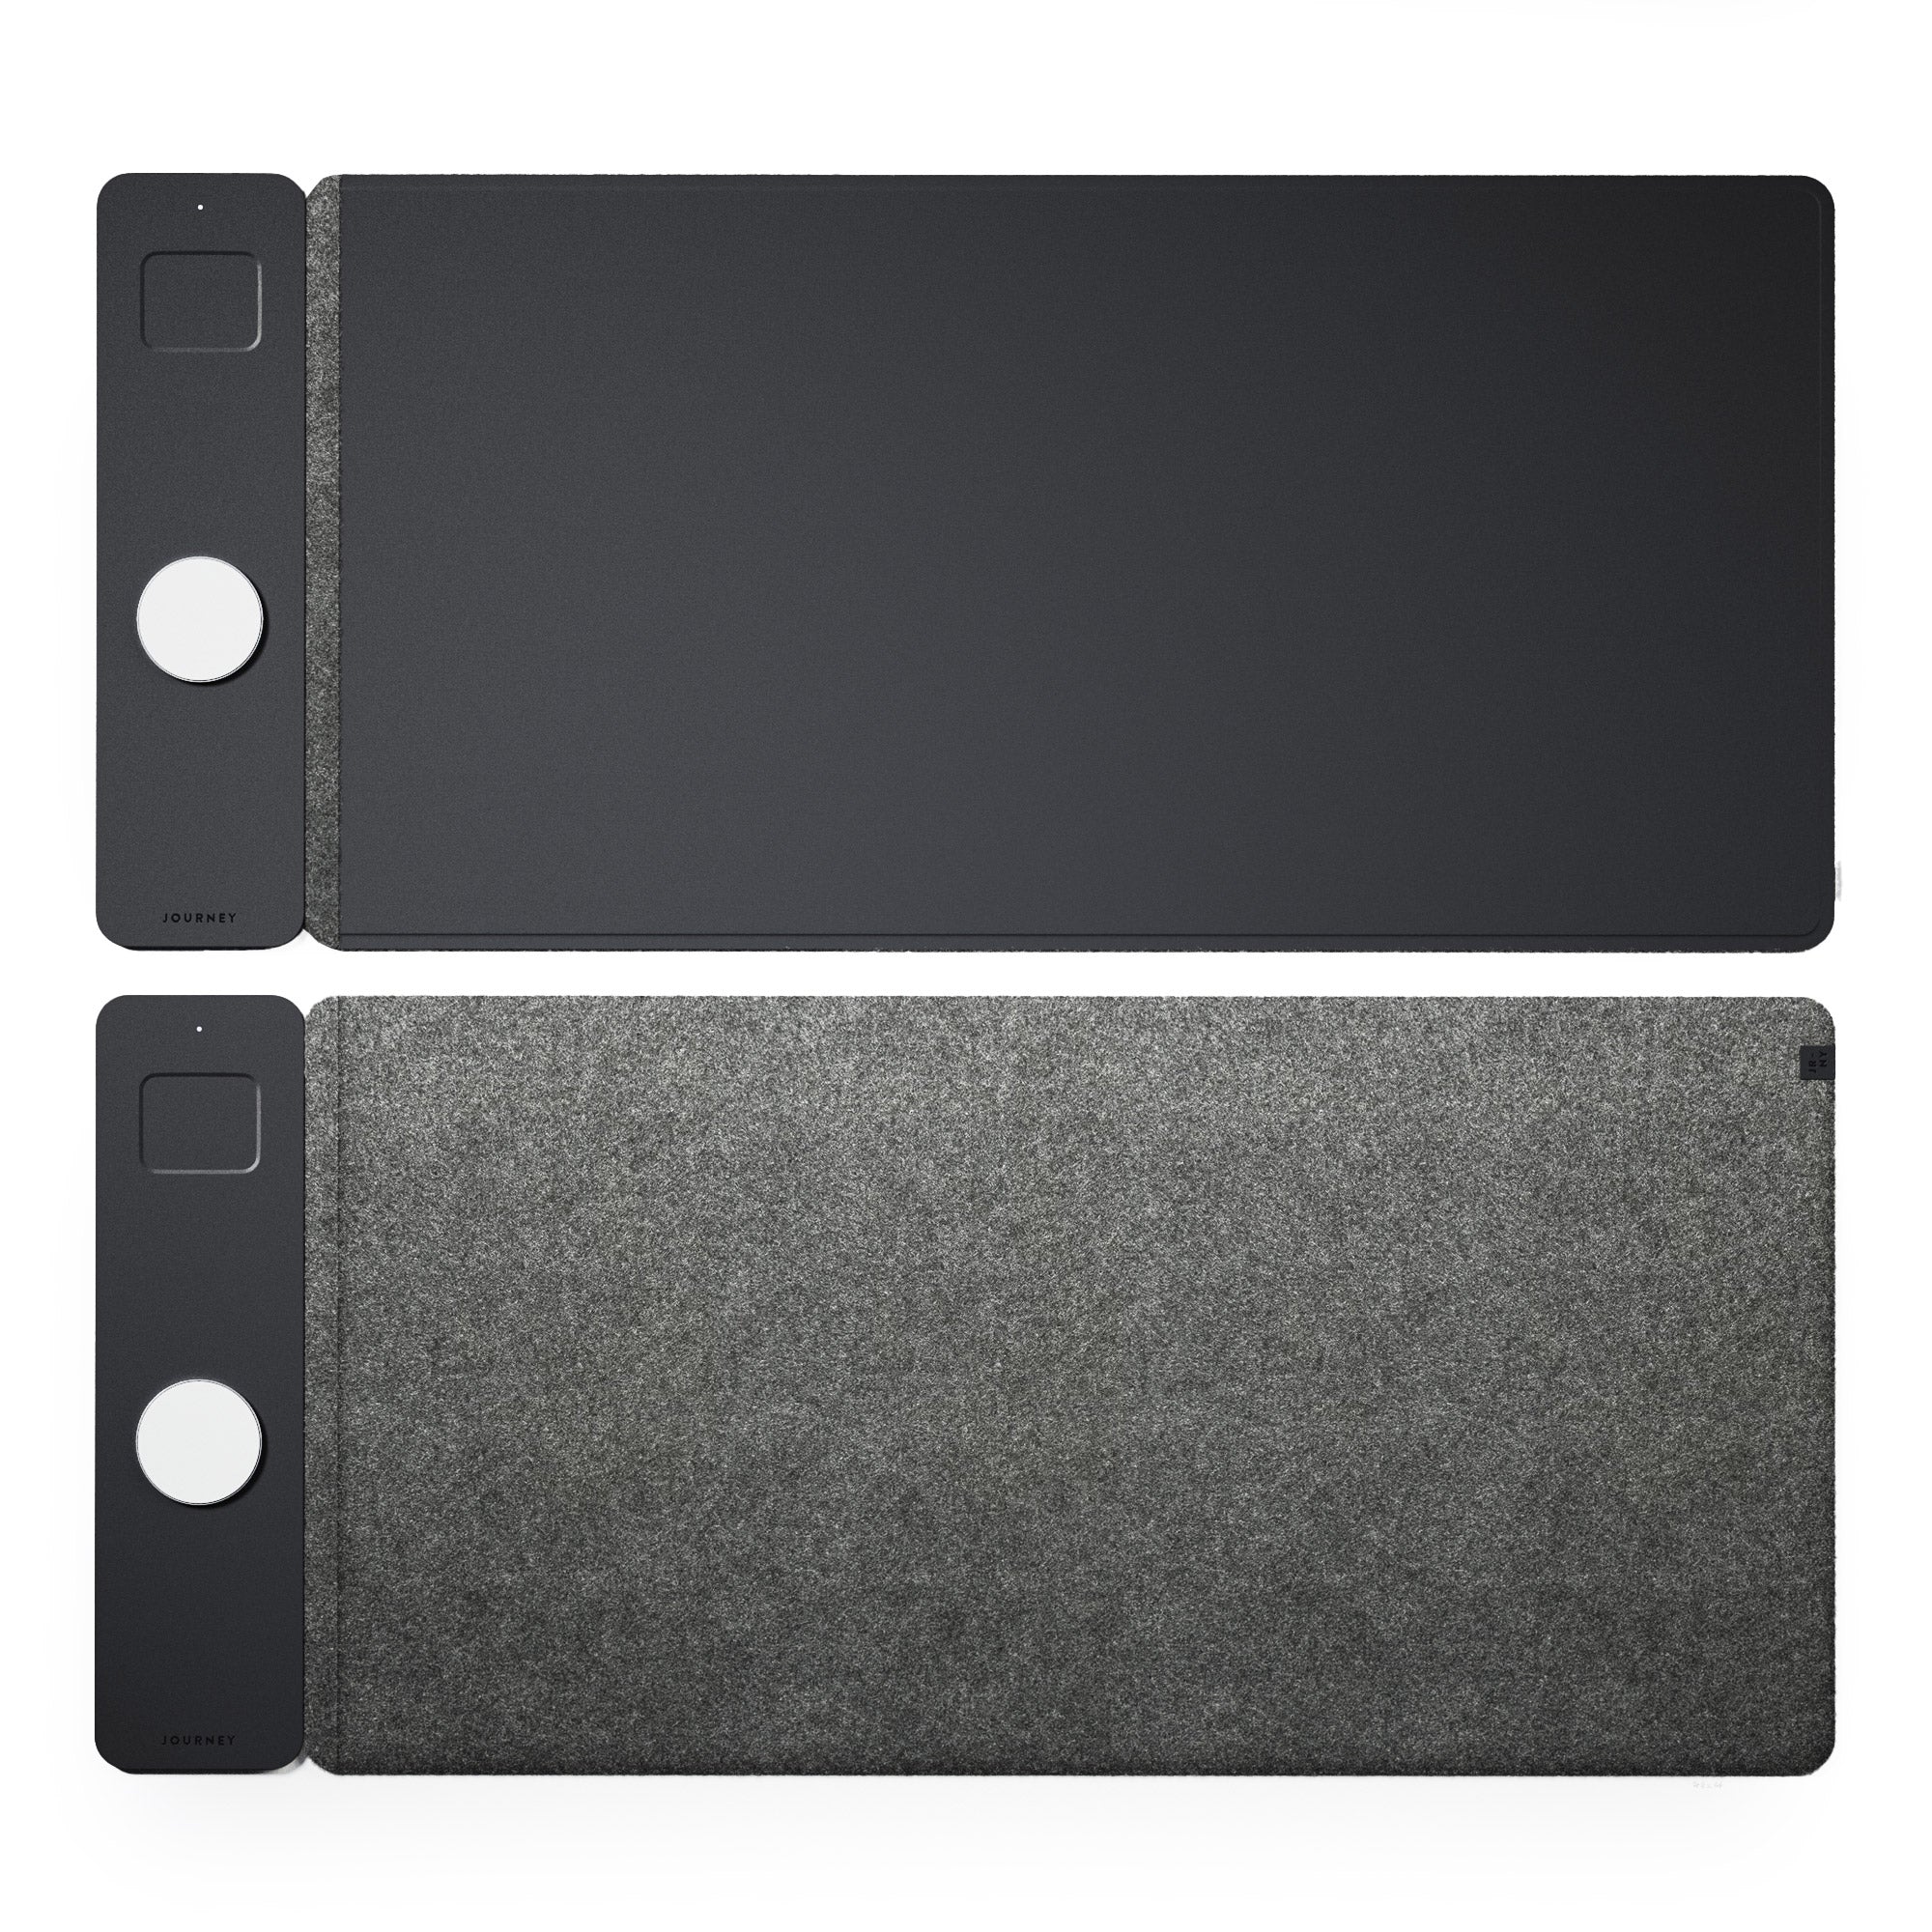 The Journey Alti Desk Mat - the perfect addition to a minimalist desk set  up..? 